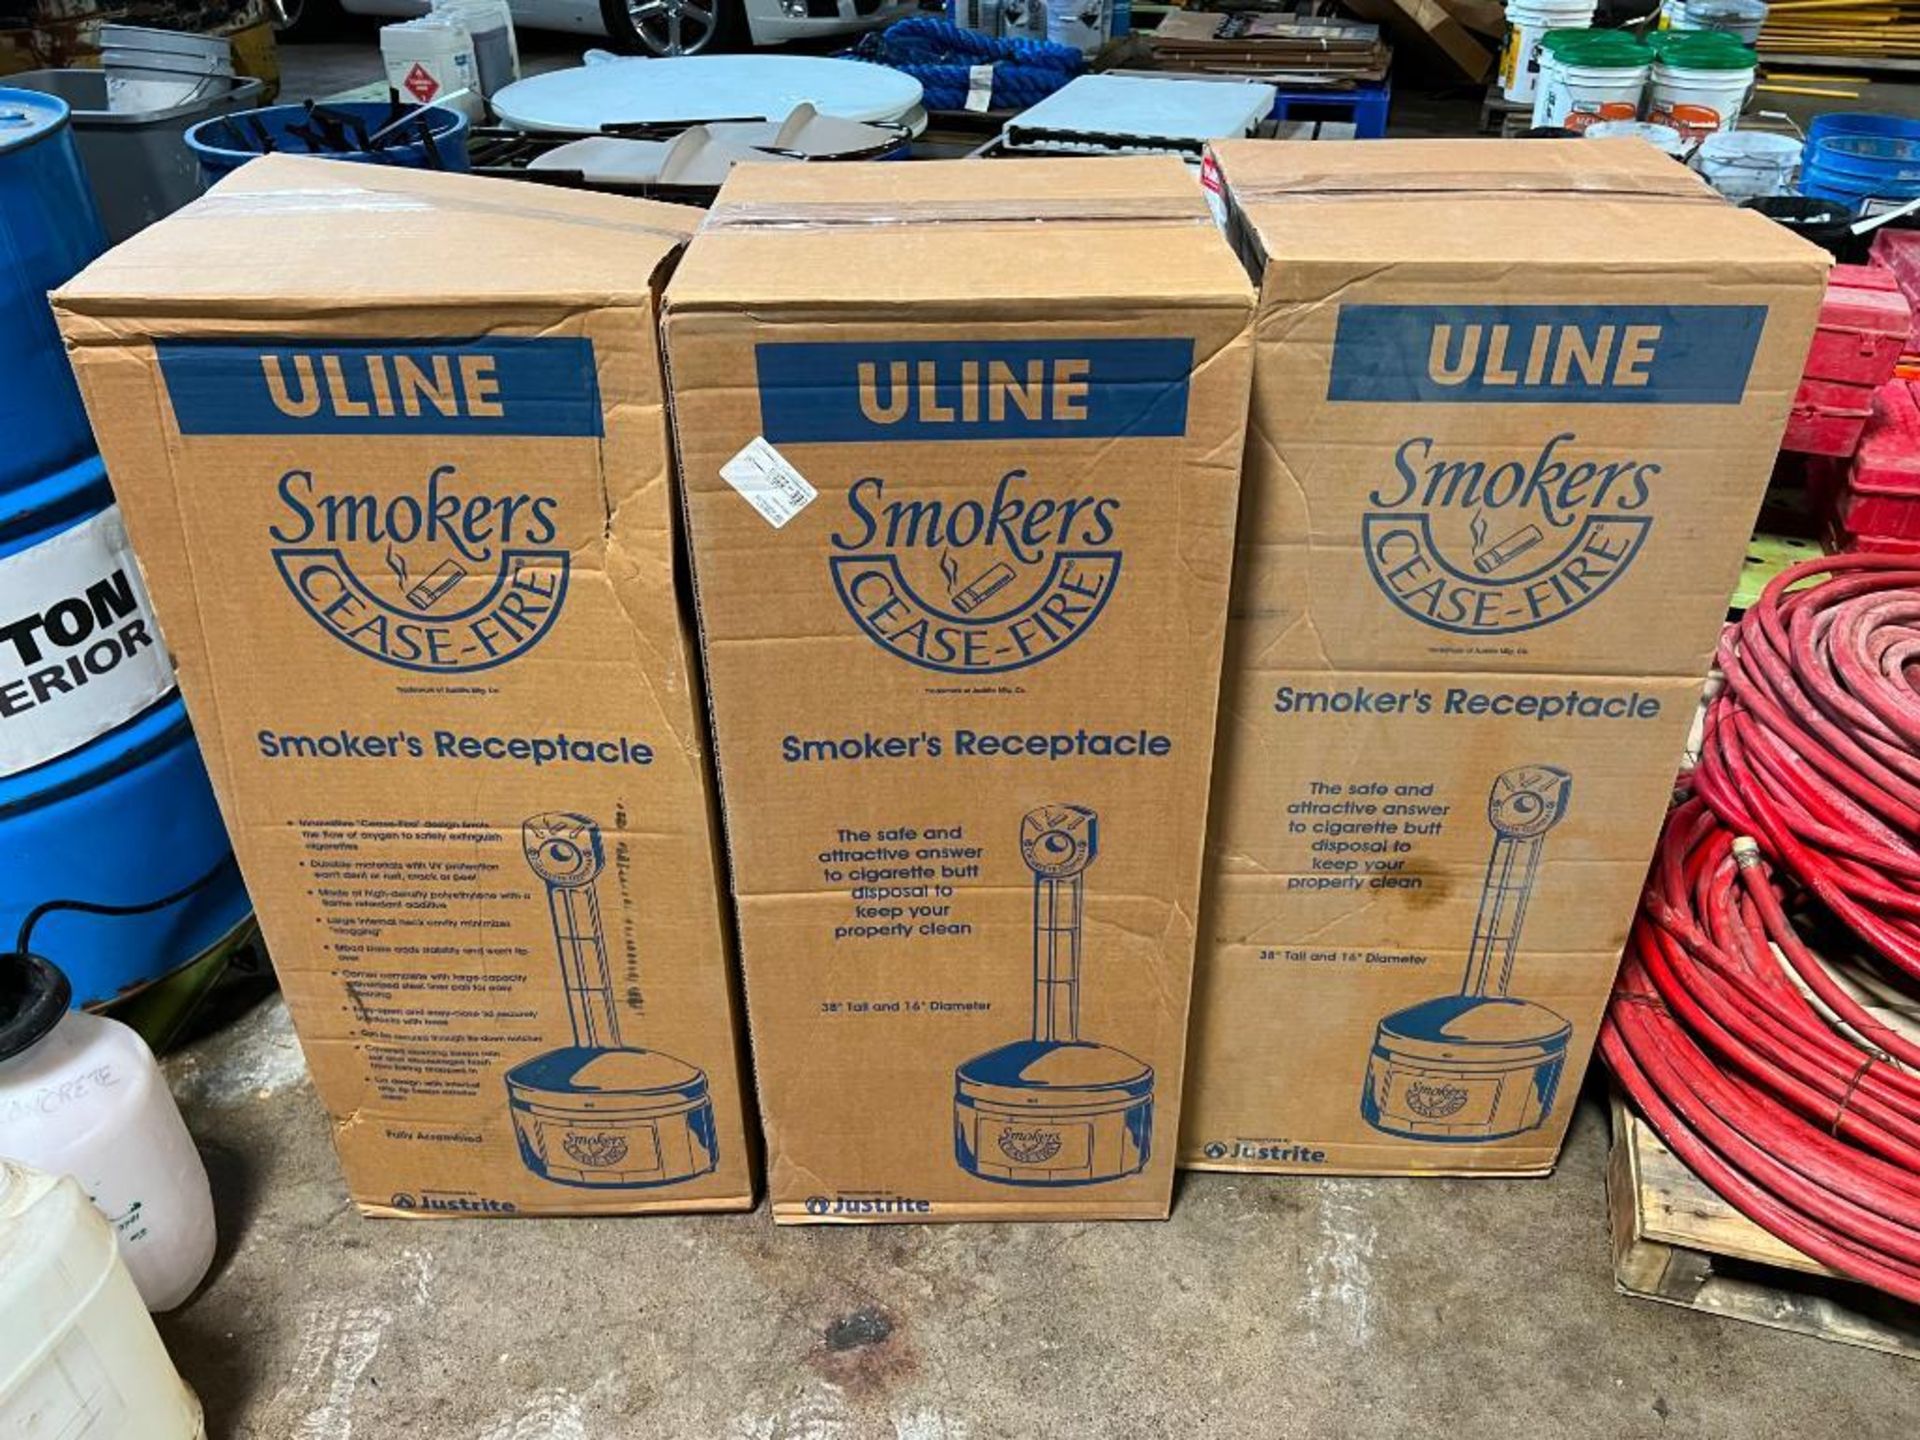 (3) New ULine Smokers Cease-Fire Receptacle. Located in Mt. Pleasant, IA